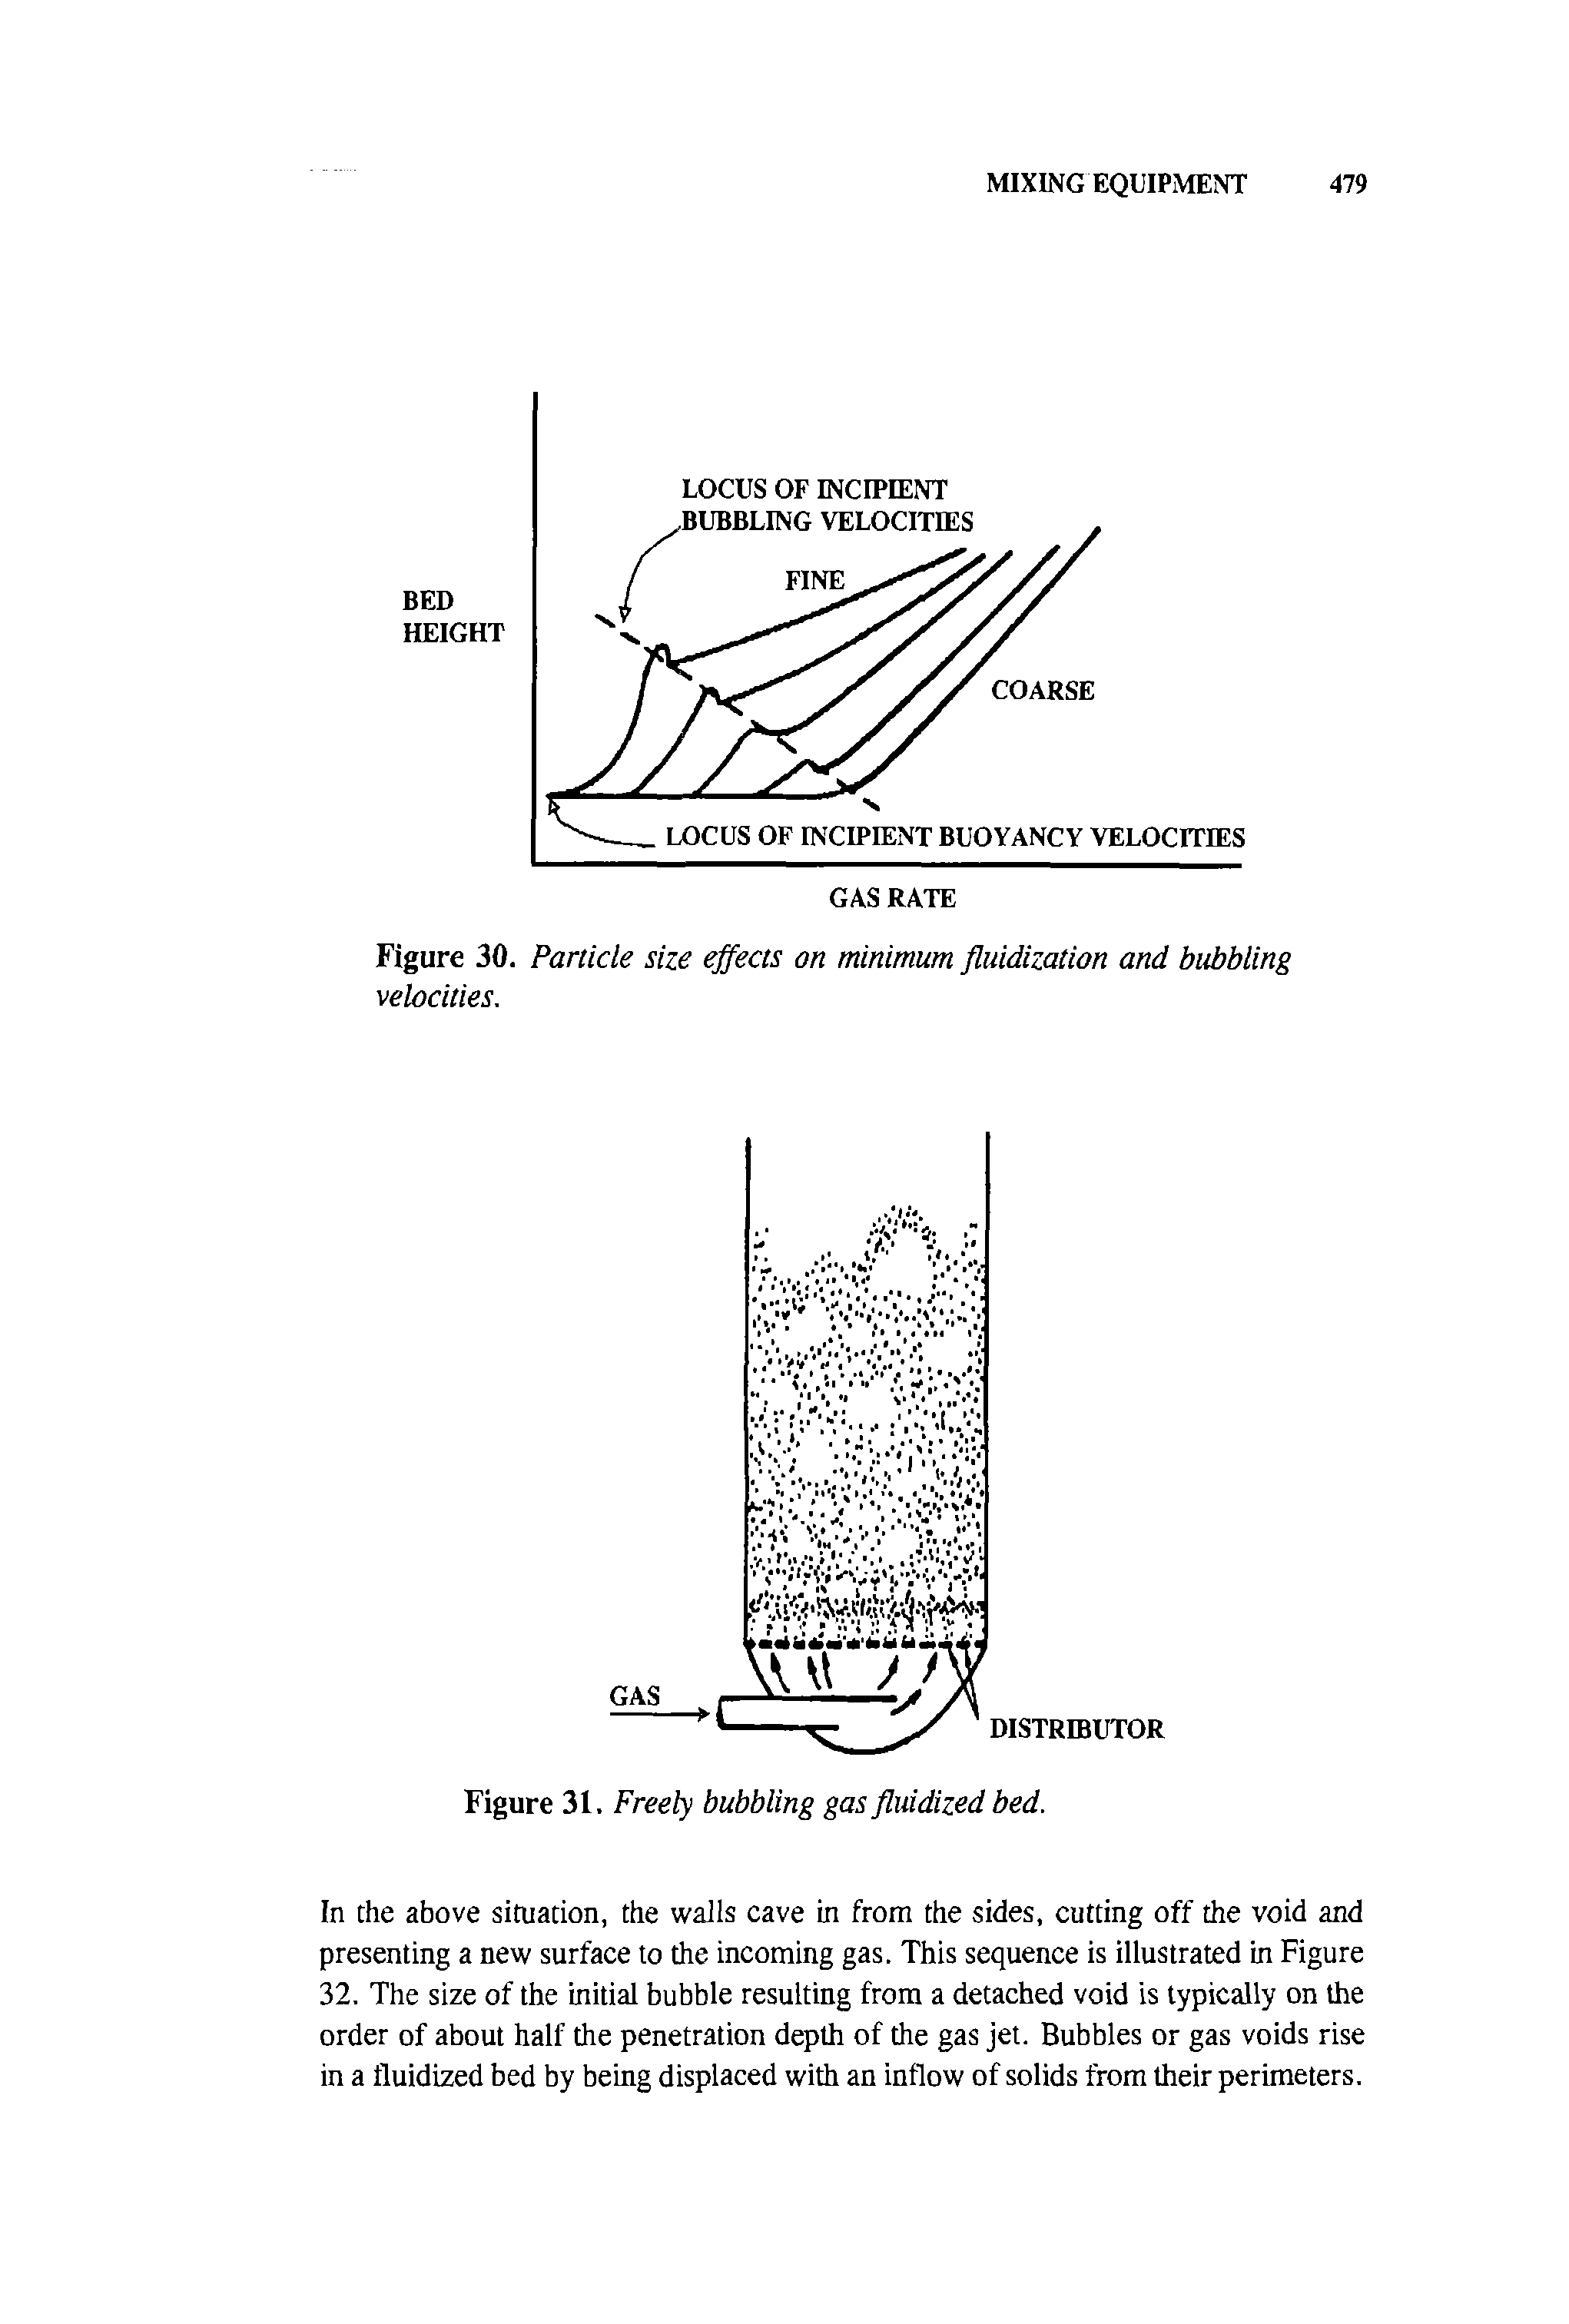 Figure 30. Particle size effects on minimum fluidization and bubbling velocities.